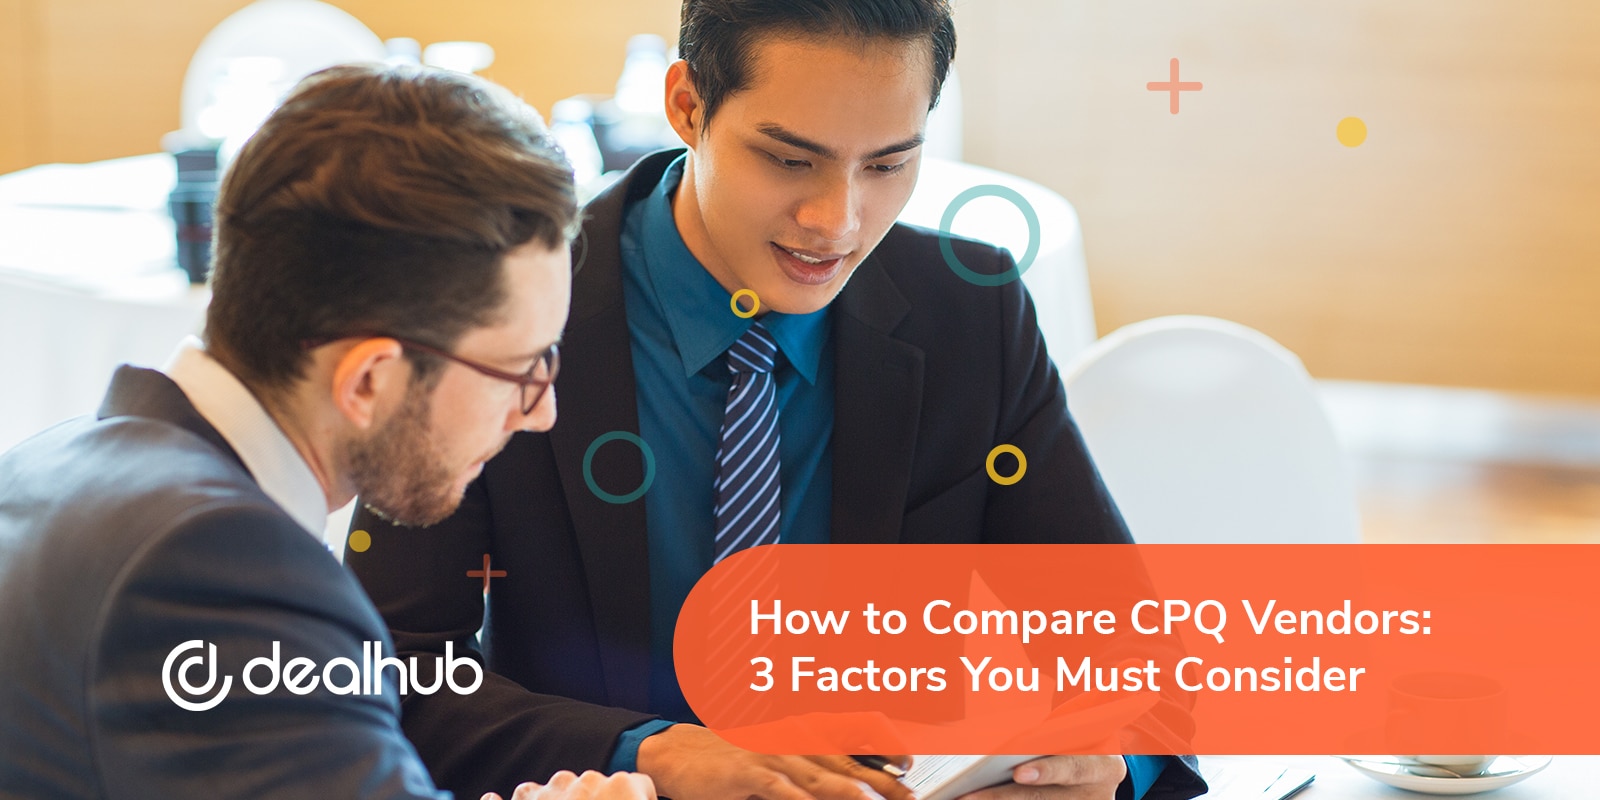 How to Compare CPQ Vendors 3 Factors You Must Consider